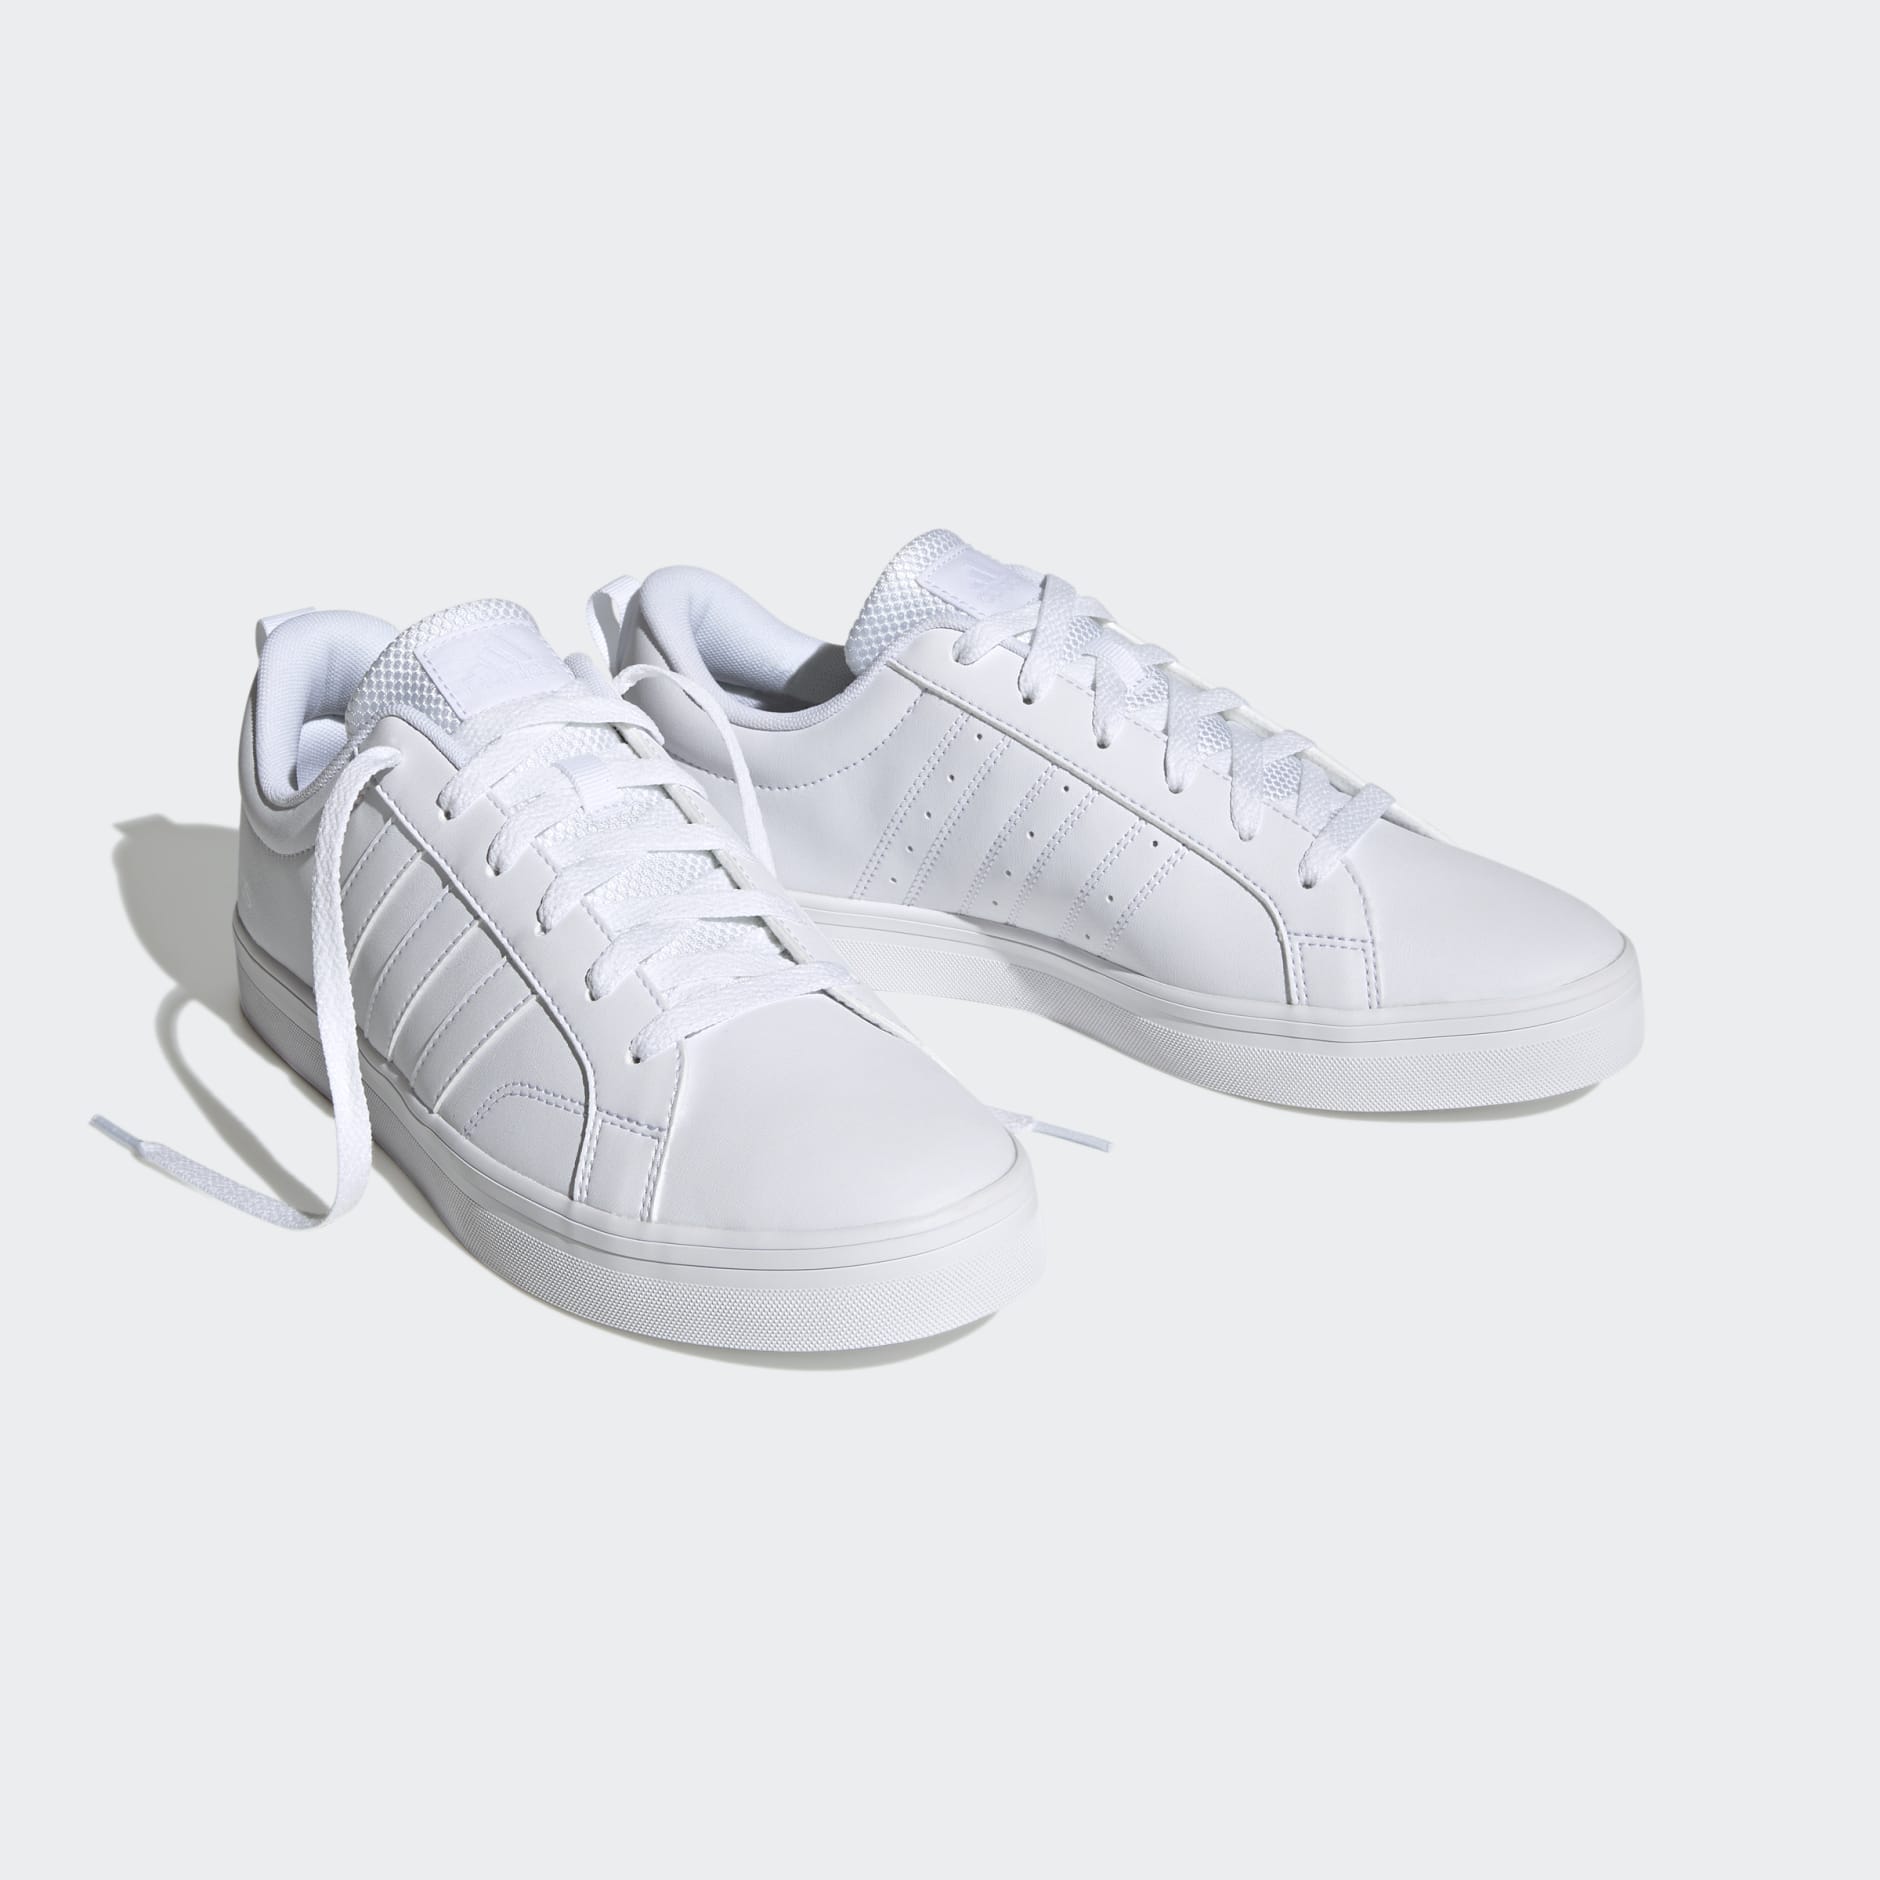 Adidas Vs Pace 2.0 trainers | Men's shoes | SPF